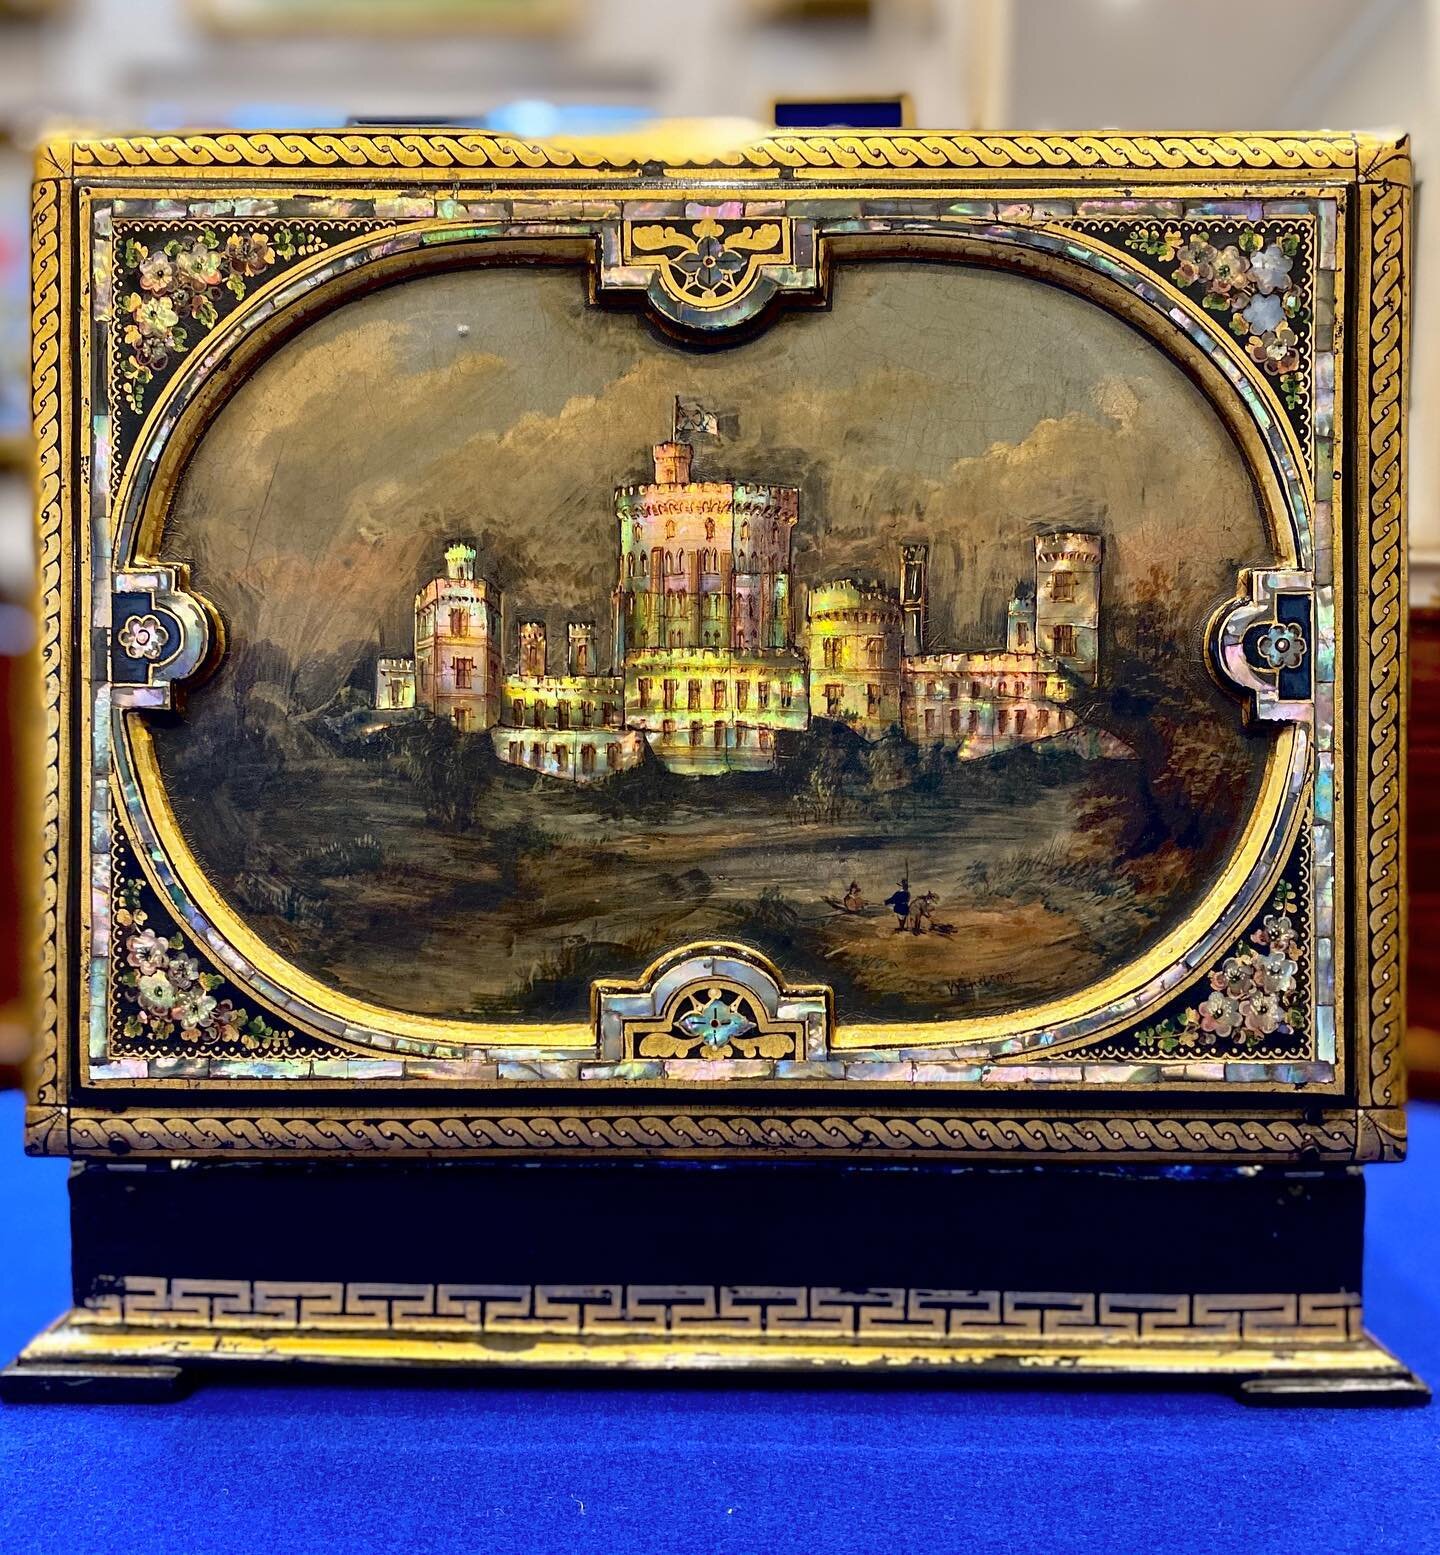 SOLD ~ Recently arrived is this superb 19th century papier-mâché writing slope, decorated with beautiful gilt borders and painted florals and a magnificent mother of pearl and painting depicting Windsor castle.